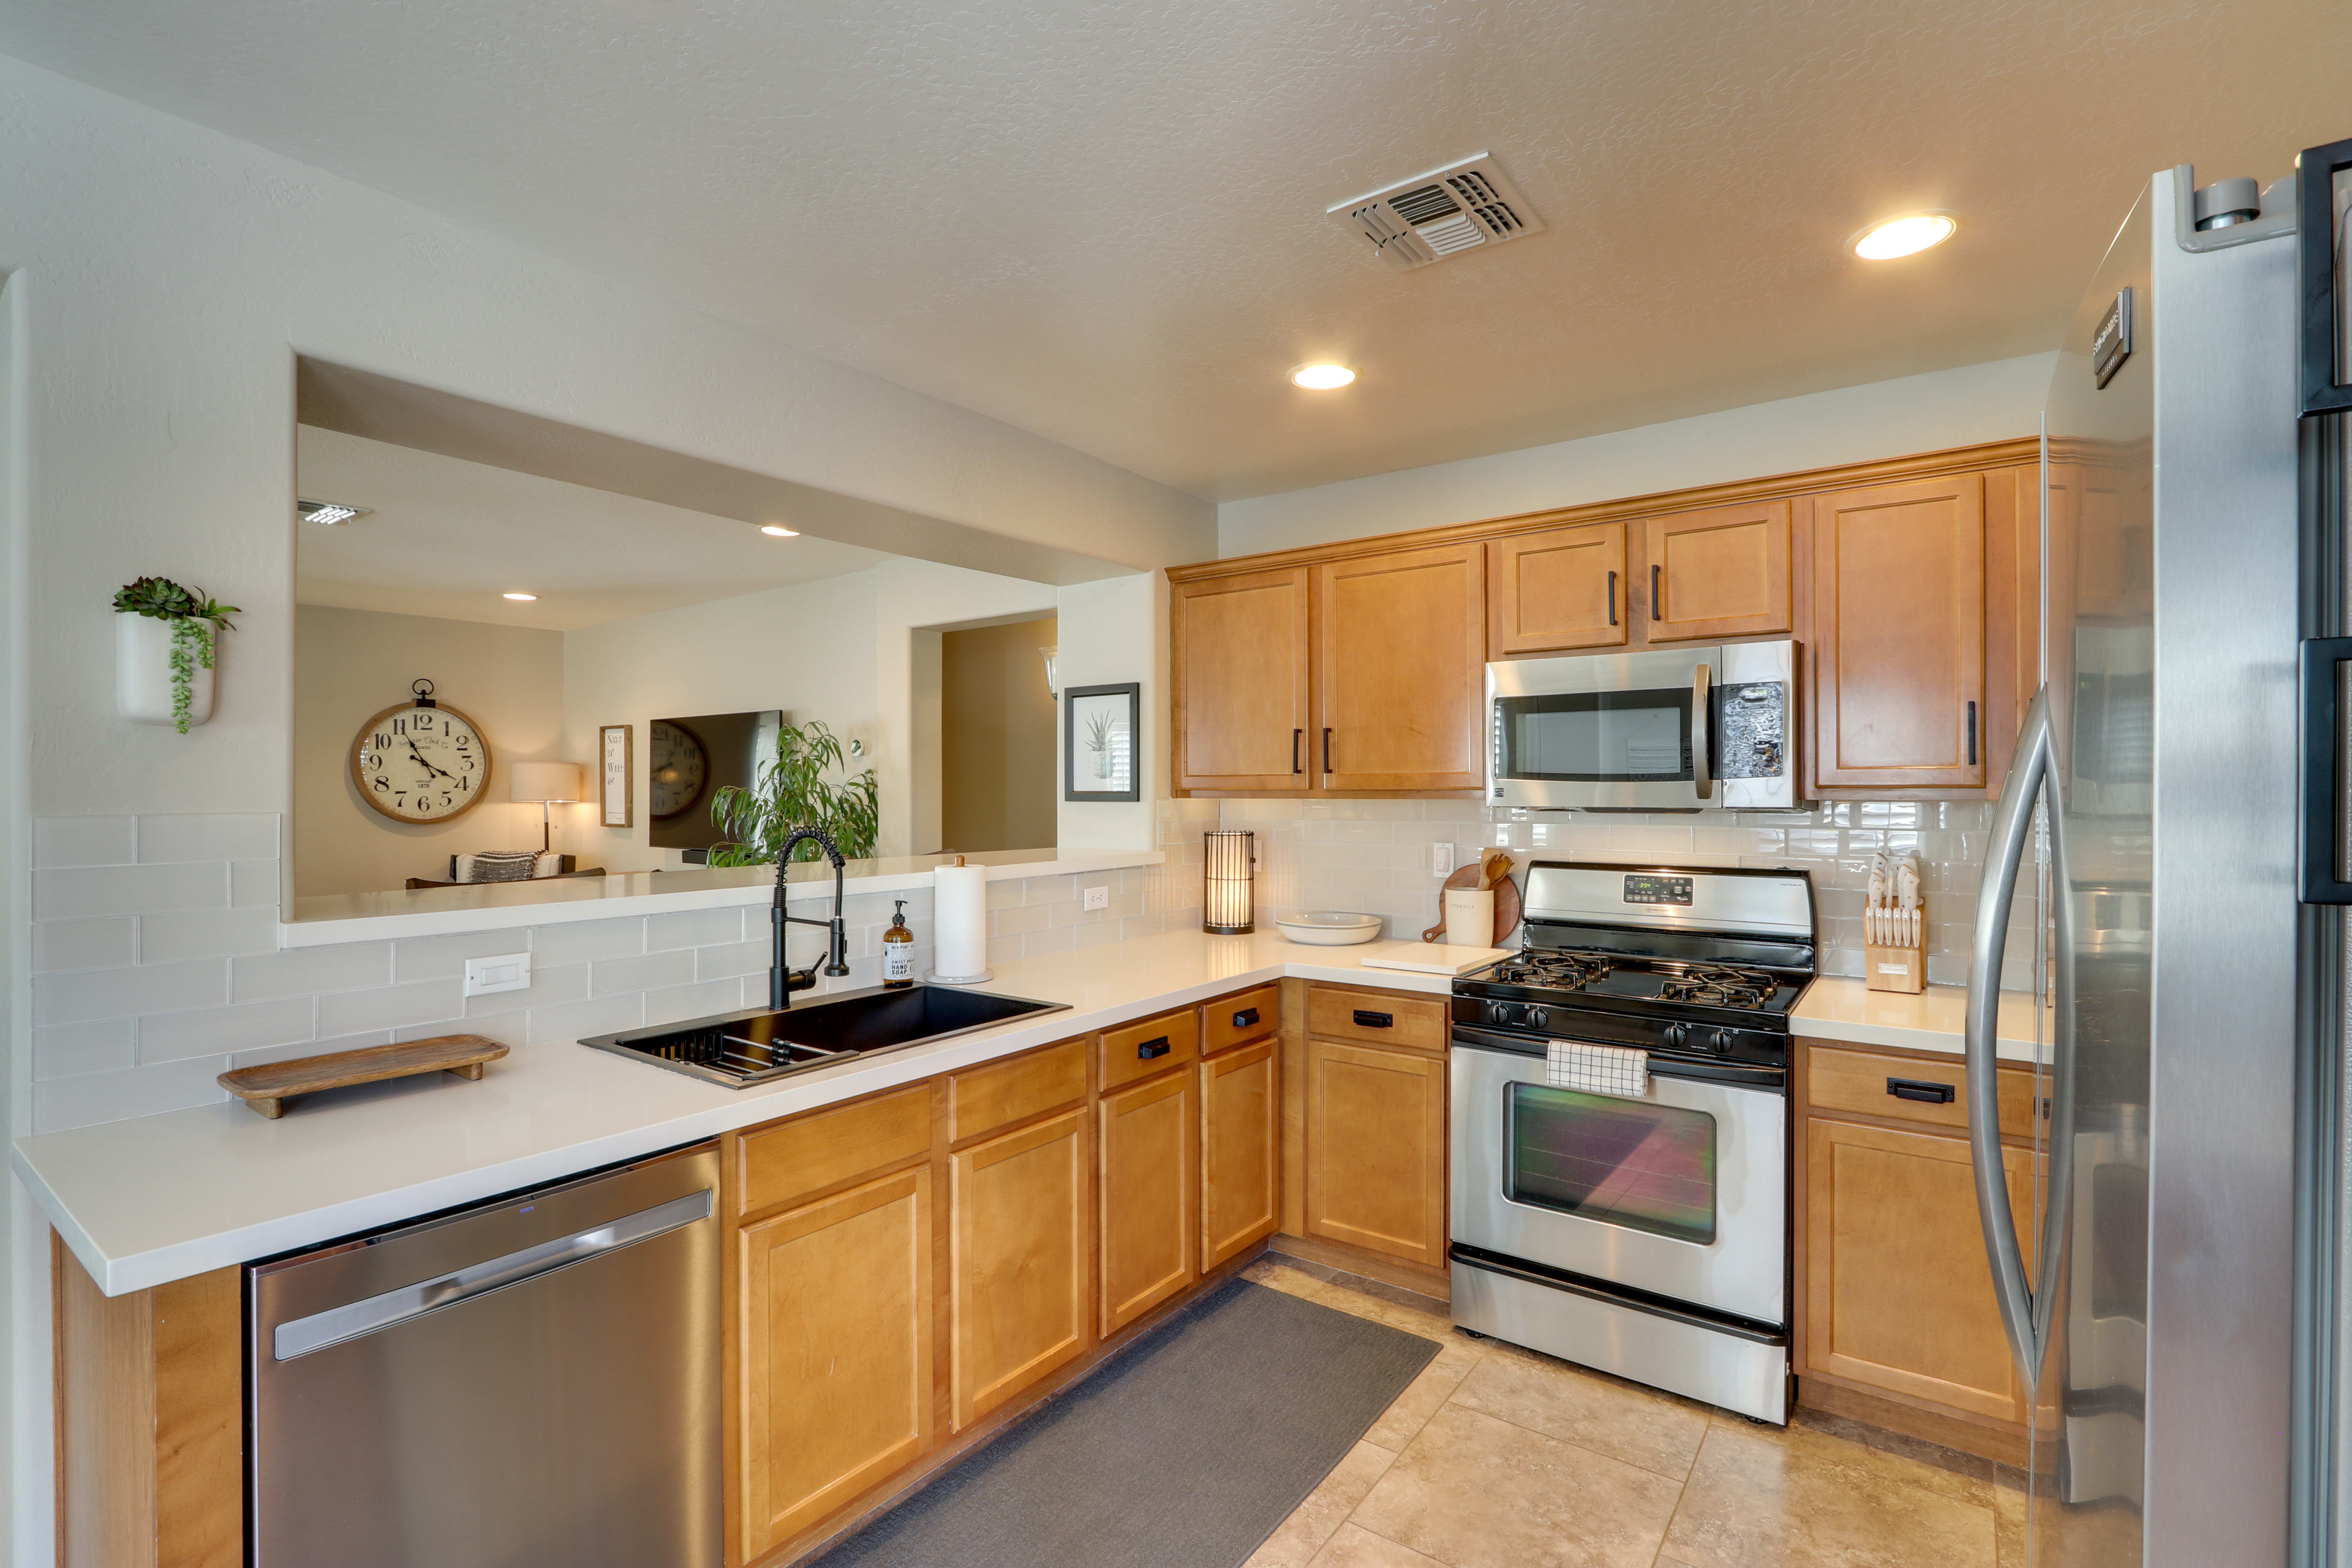 Kitchen | Main Level | Keurig Coffee Maker | Complimentary Spices